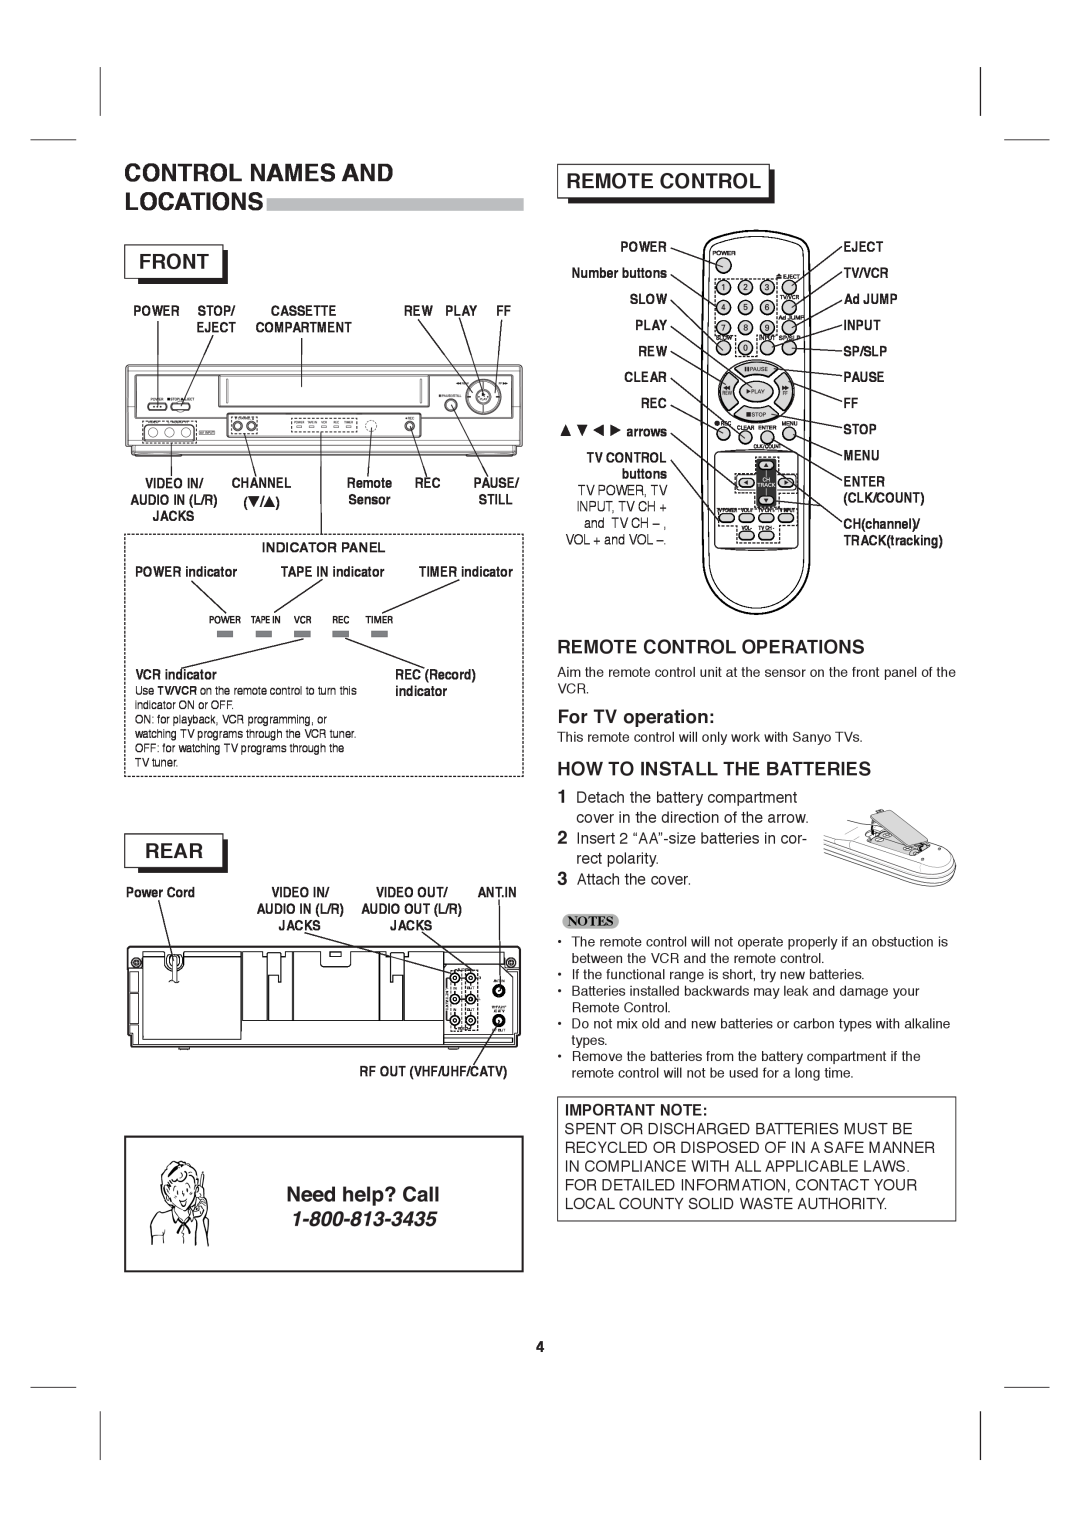 Sanyo VWM-900 instruction manual Control Names And Locations, Front, Rear, Remote Control Operations, For TV operation 